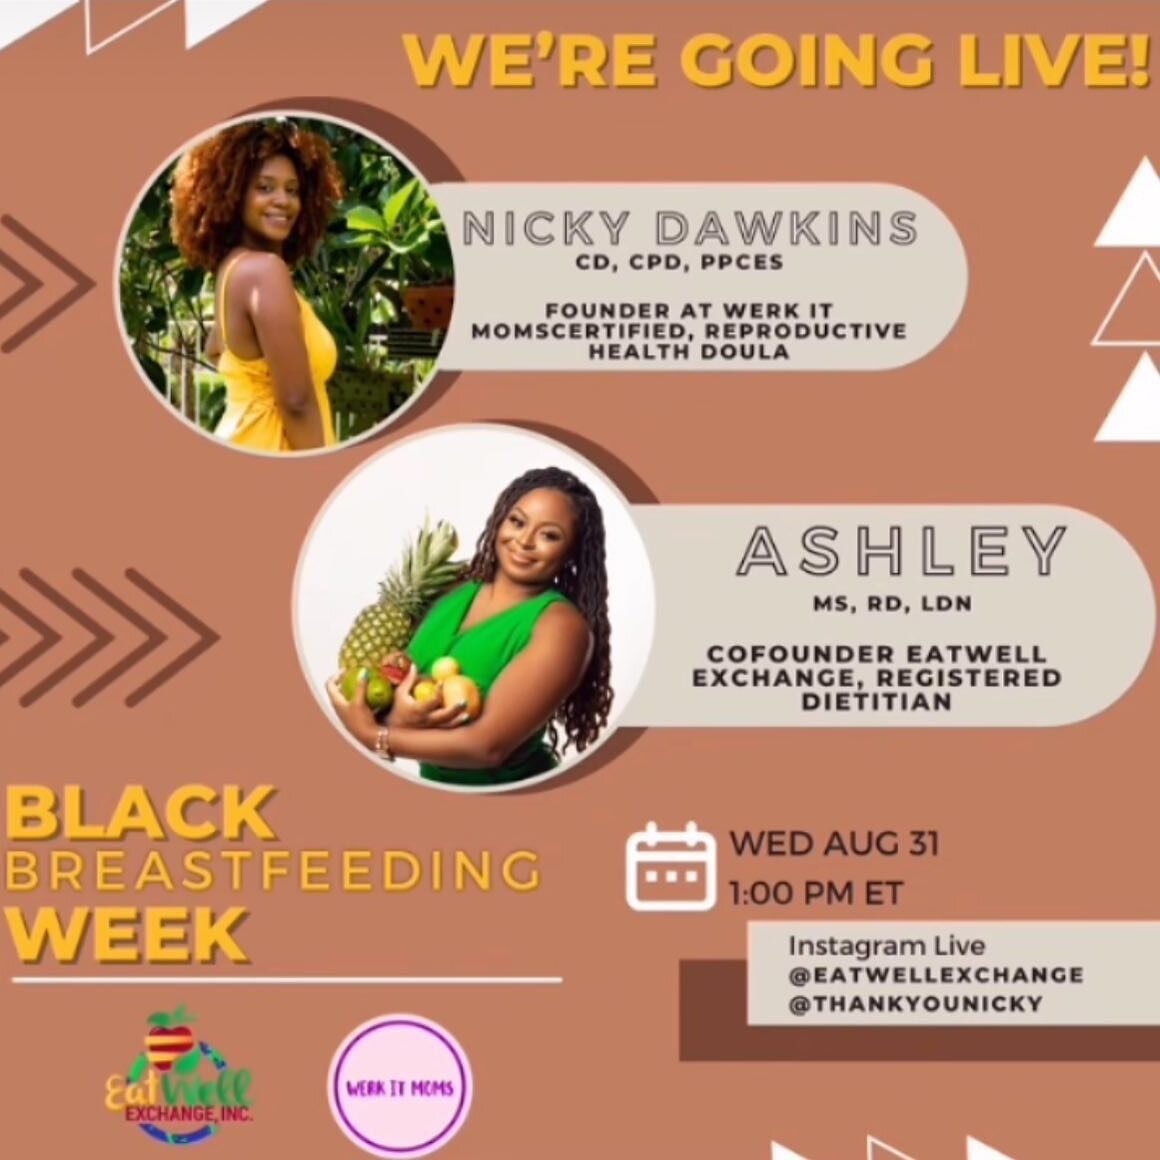 Reshaped from: @blkbfingweek 

SET YOUR REMINDERS FOR 1PM EST TODAY!!!

#Repost @eatwellexchange with @use.repost
・・・
Join me and @thankyounicky today, Wednesday 8/30 at 1pm ET as we talk all things Breastfeeding. August 25-31 is black Breastfeeding 